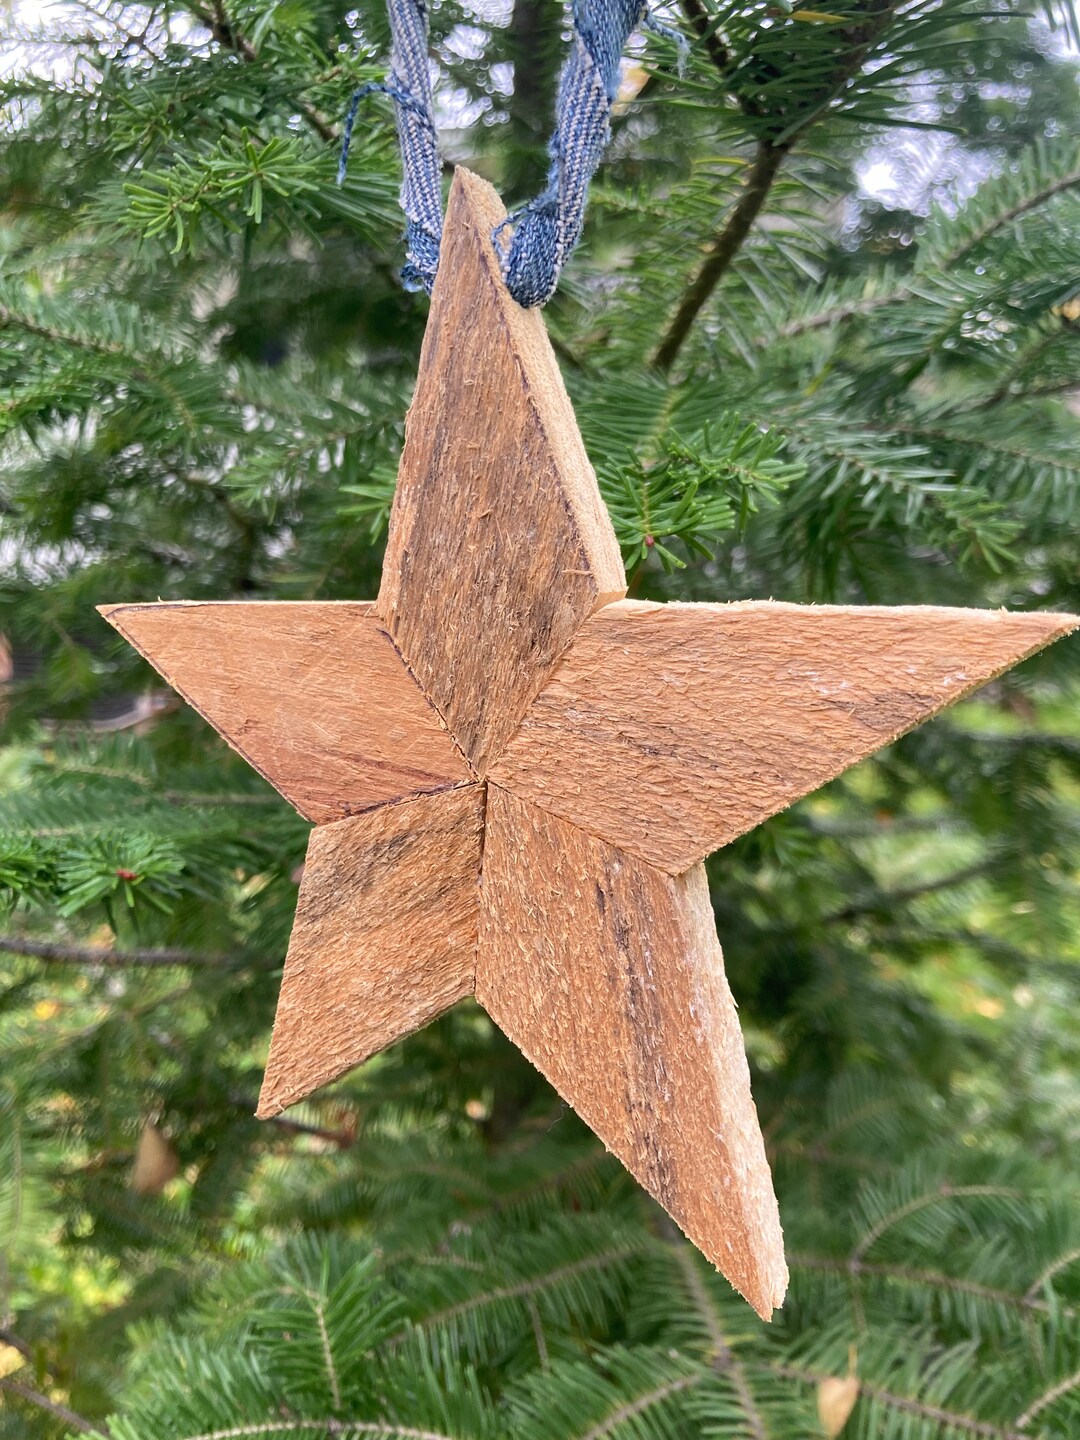 Wooden Star Ornaments — The Heritage Society